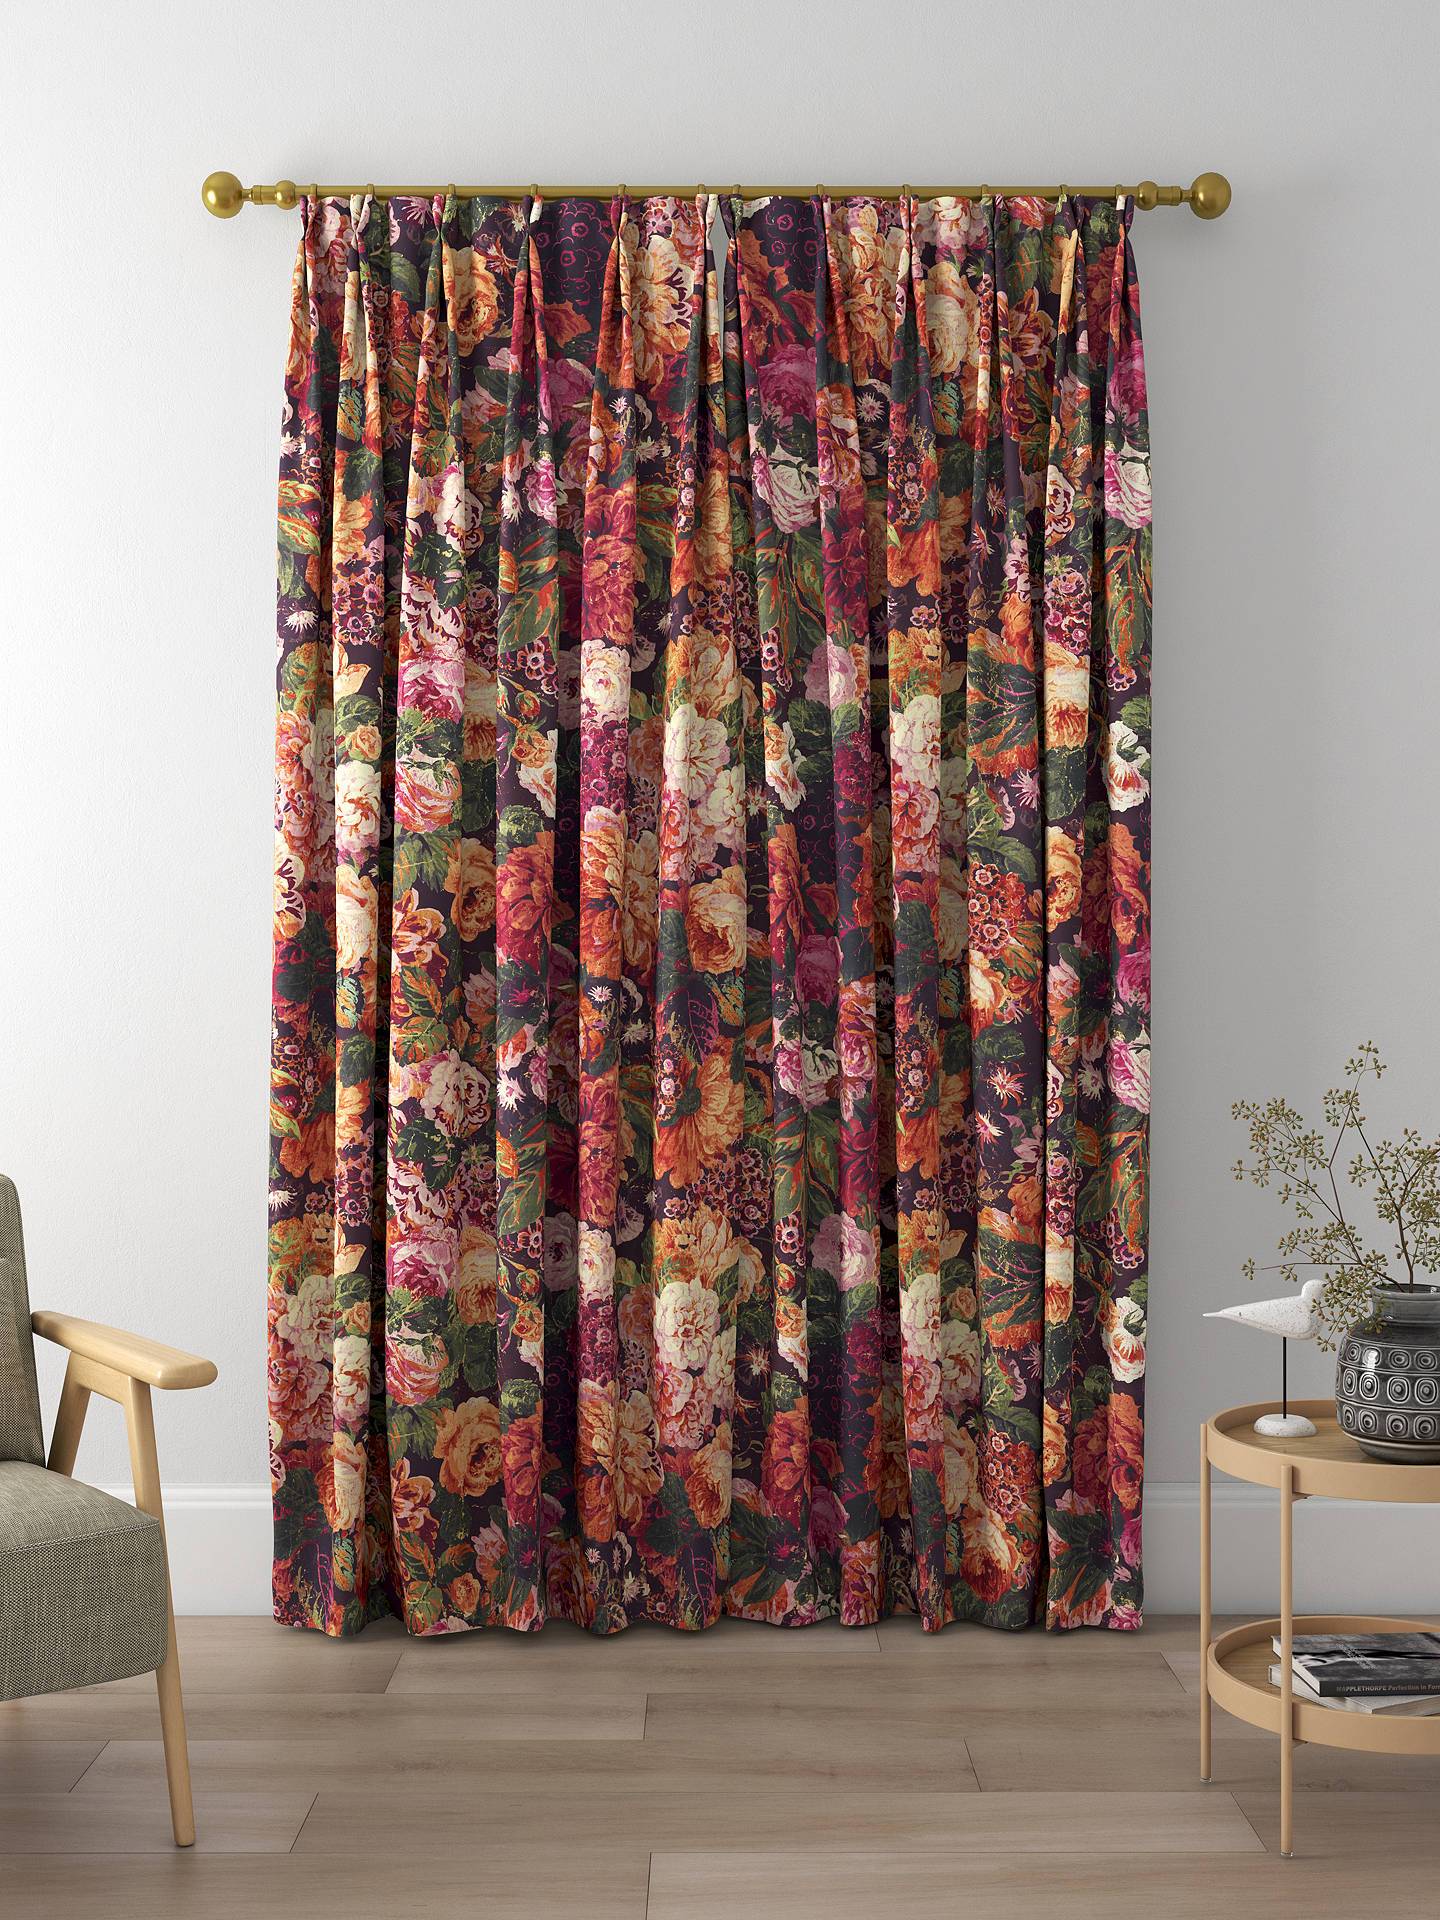 Sanderson Very Rose and Peony Made to Measure Curtains, Wild Plum